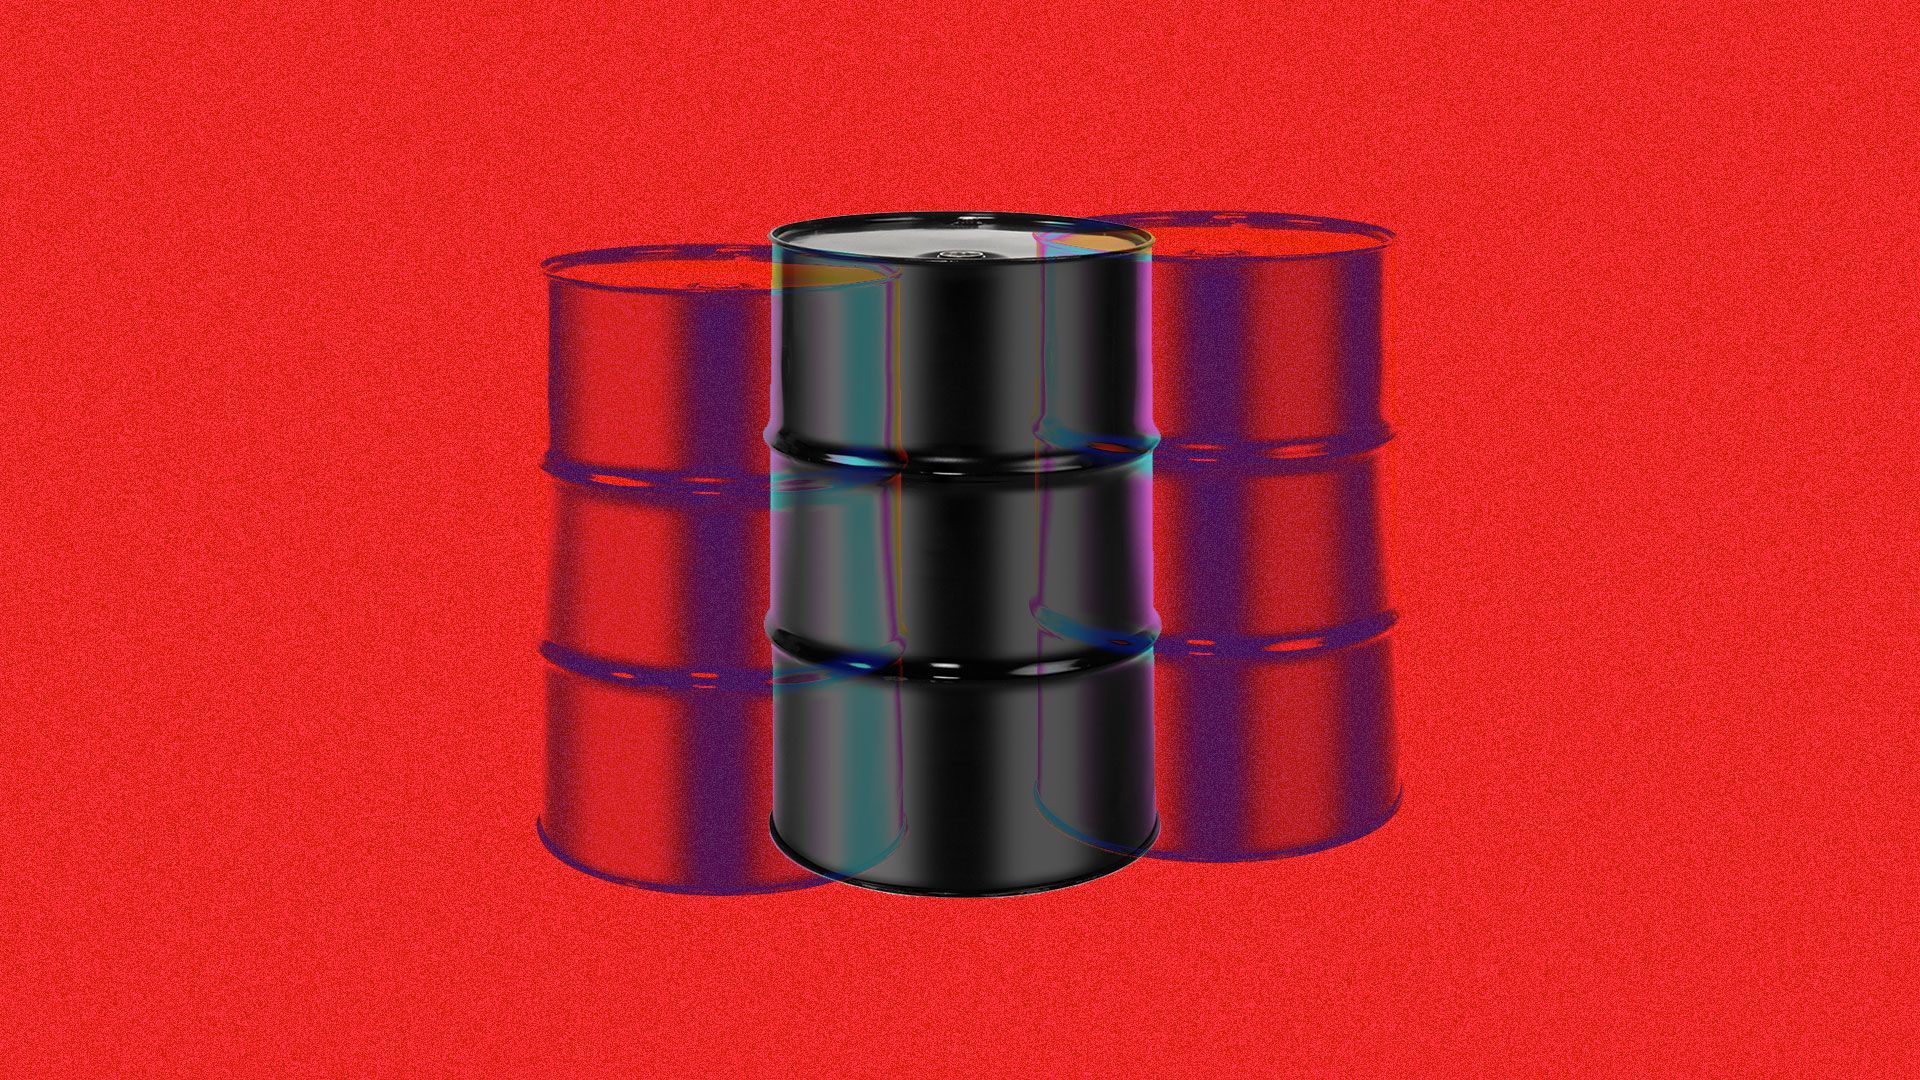 Illustration of three oil barrels with red background